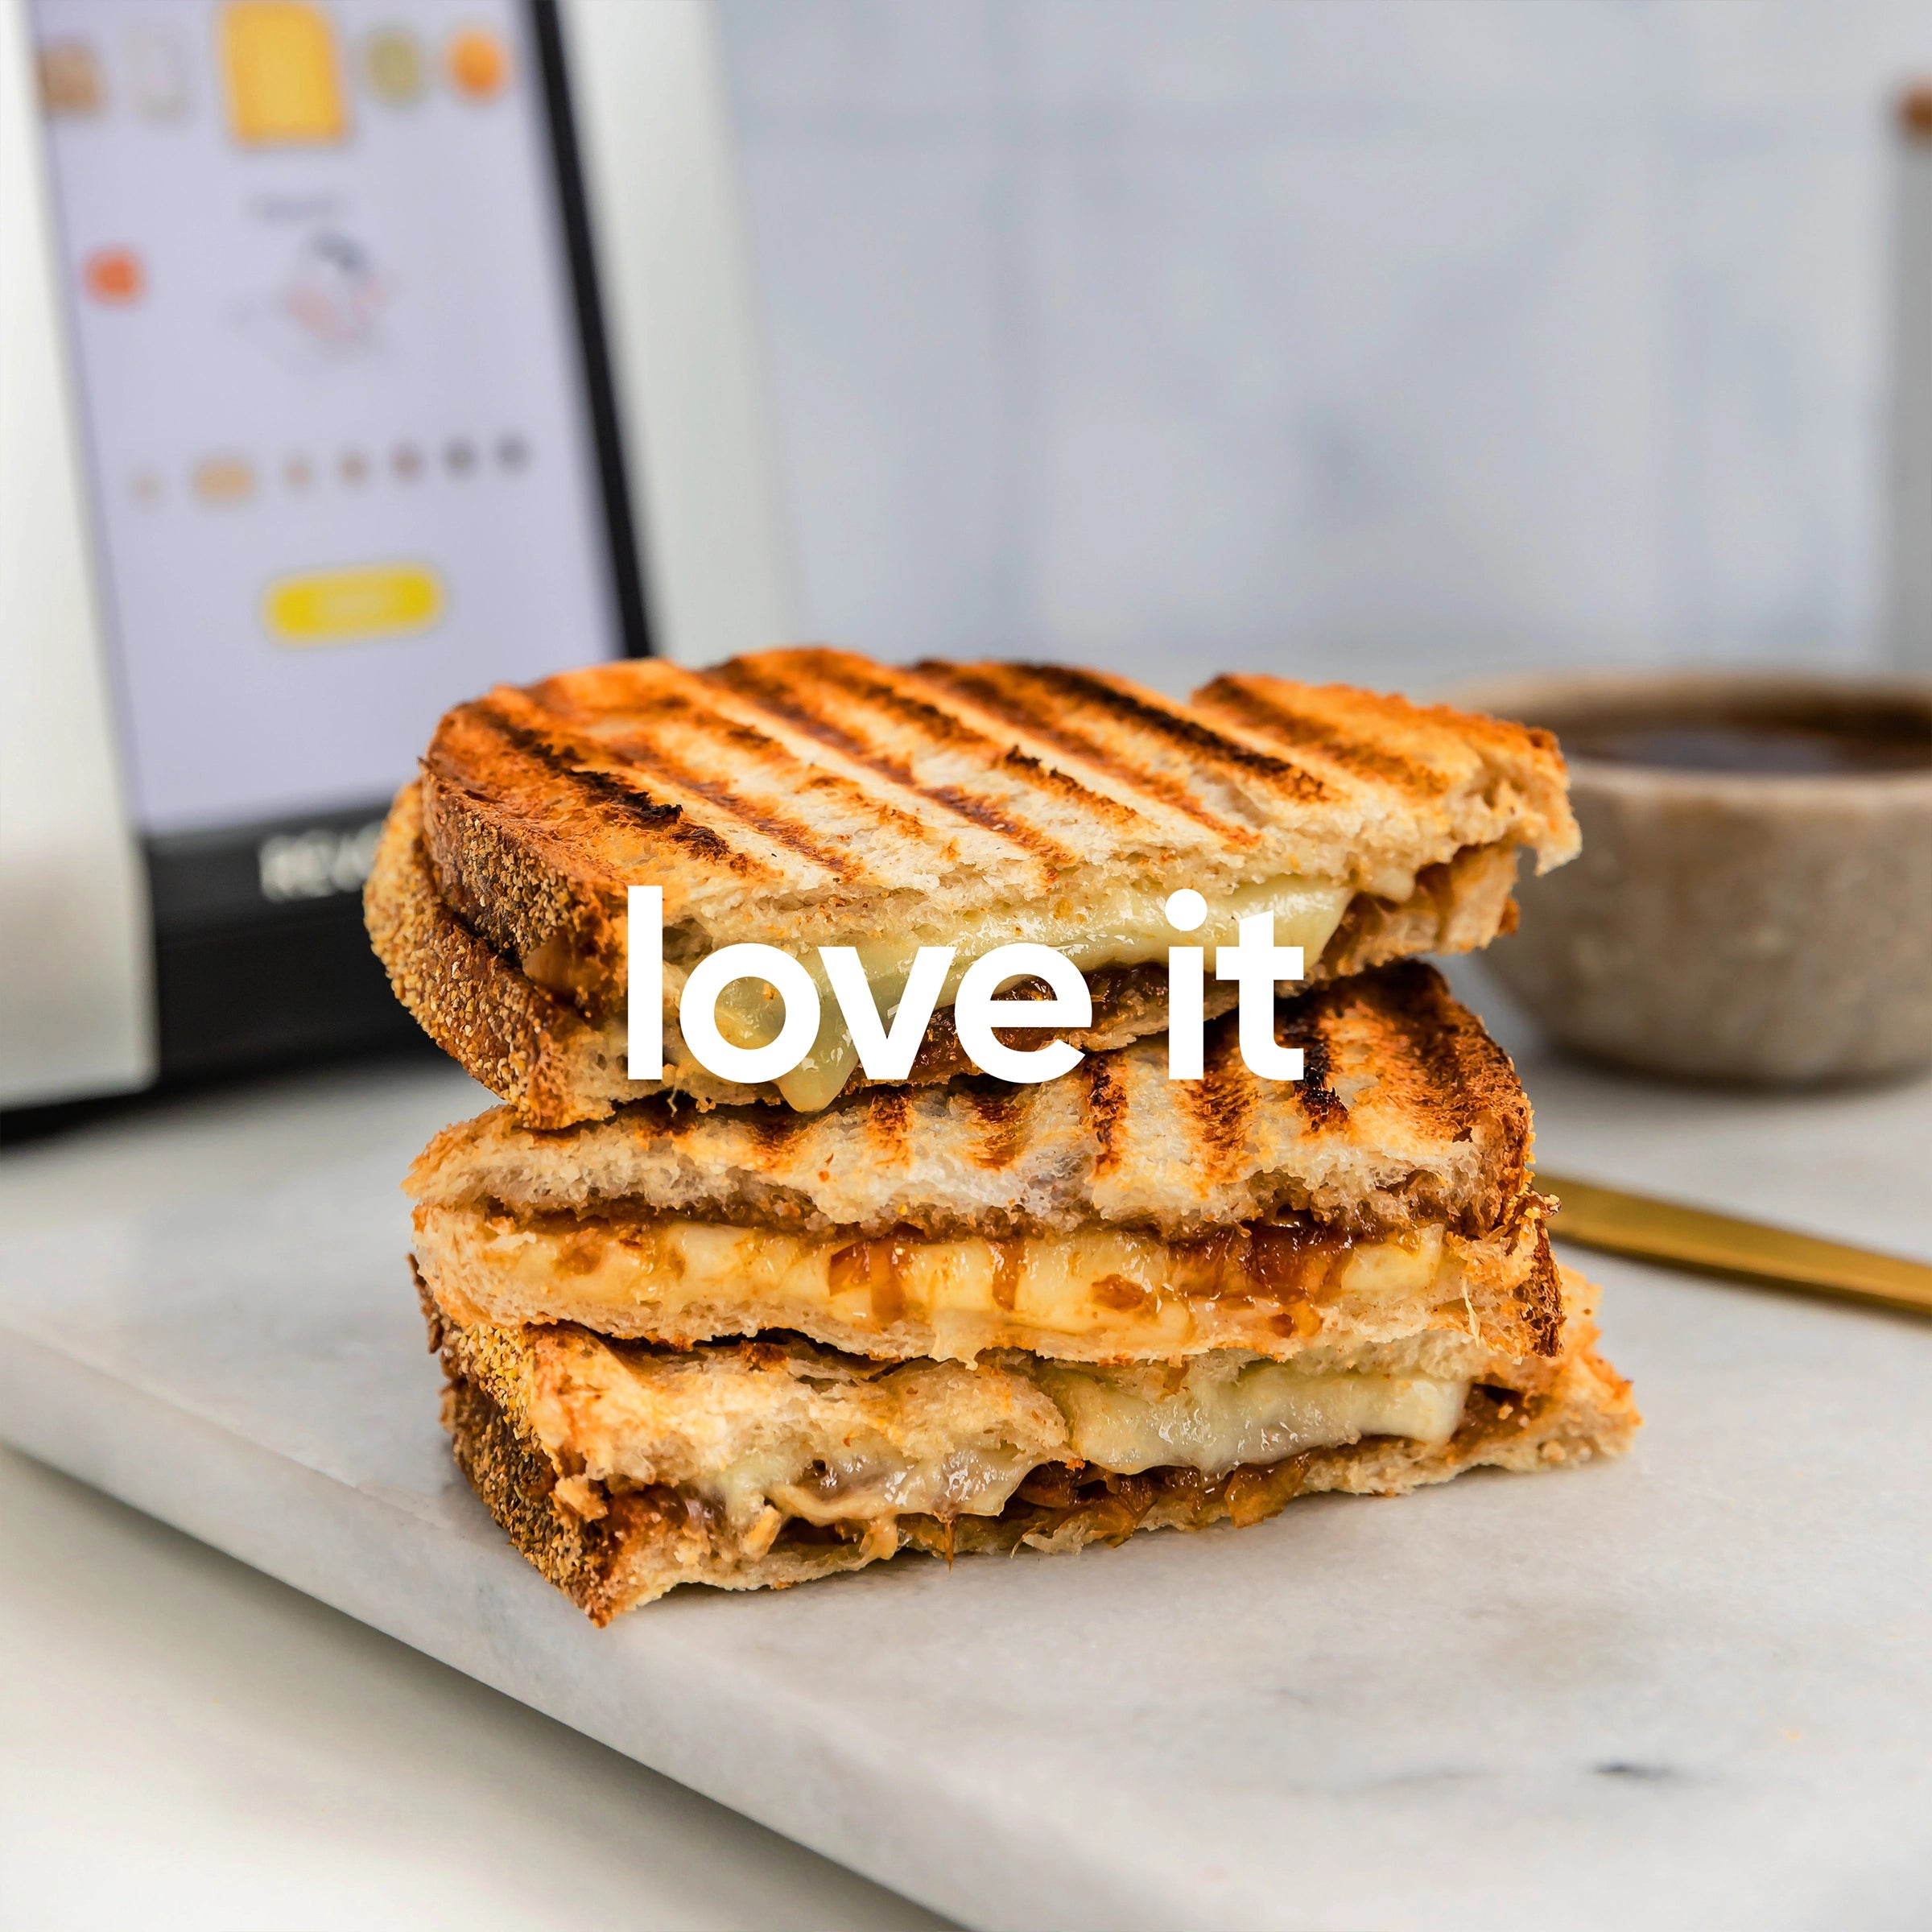 Revolution Cooking Panini Press for InstaGLO Toasters